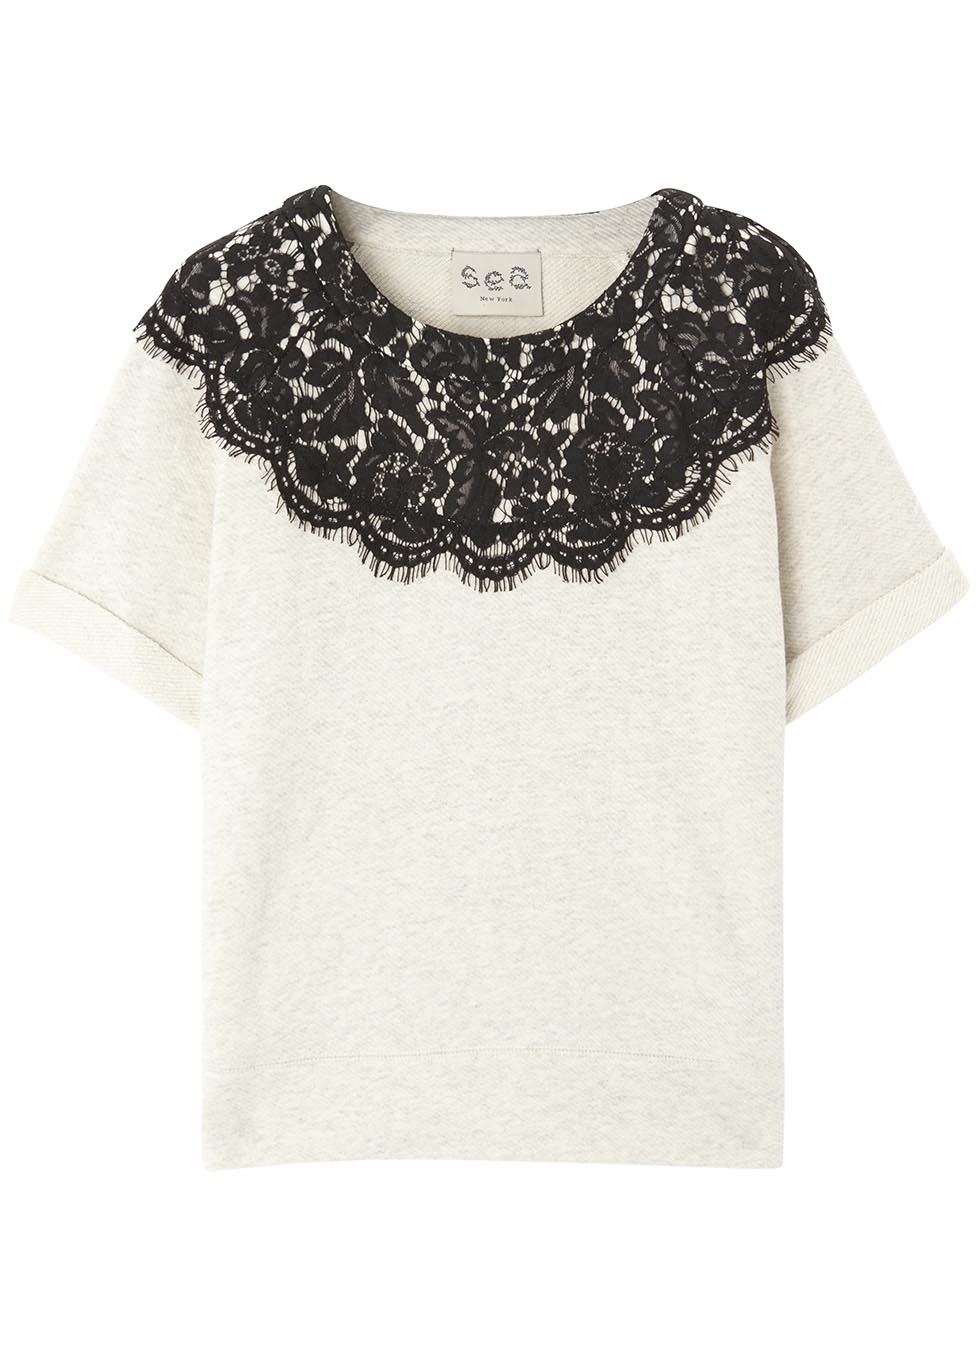 Monochrome lace and jersey top